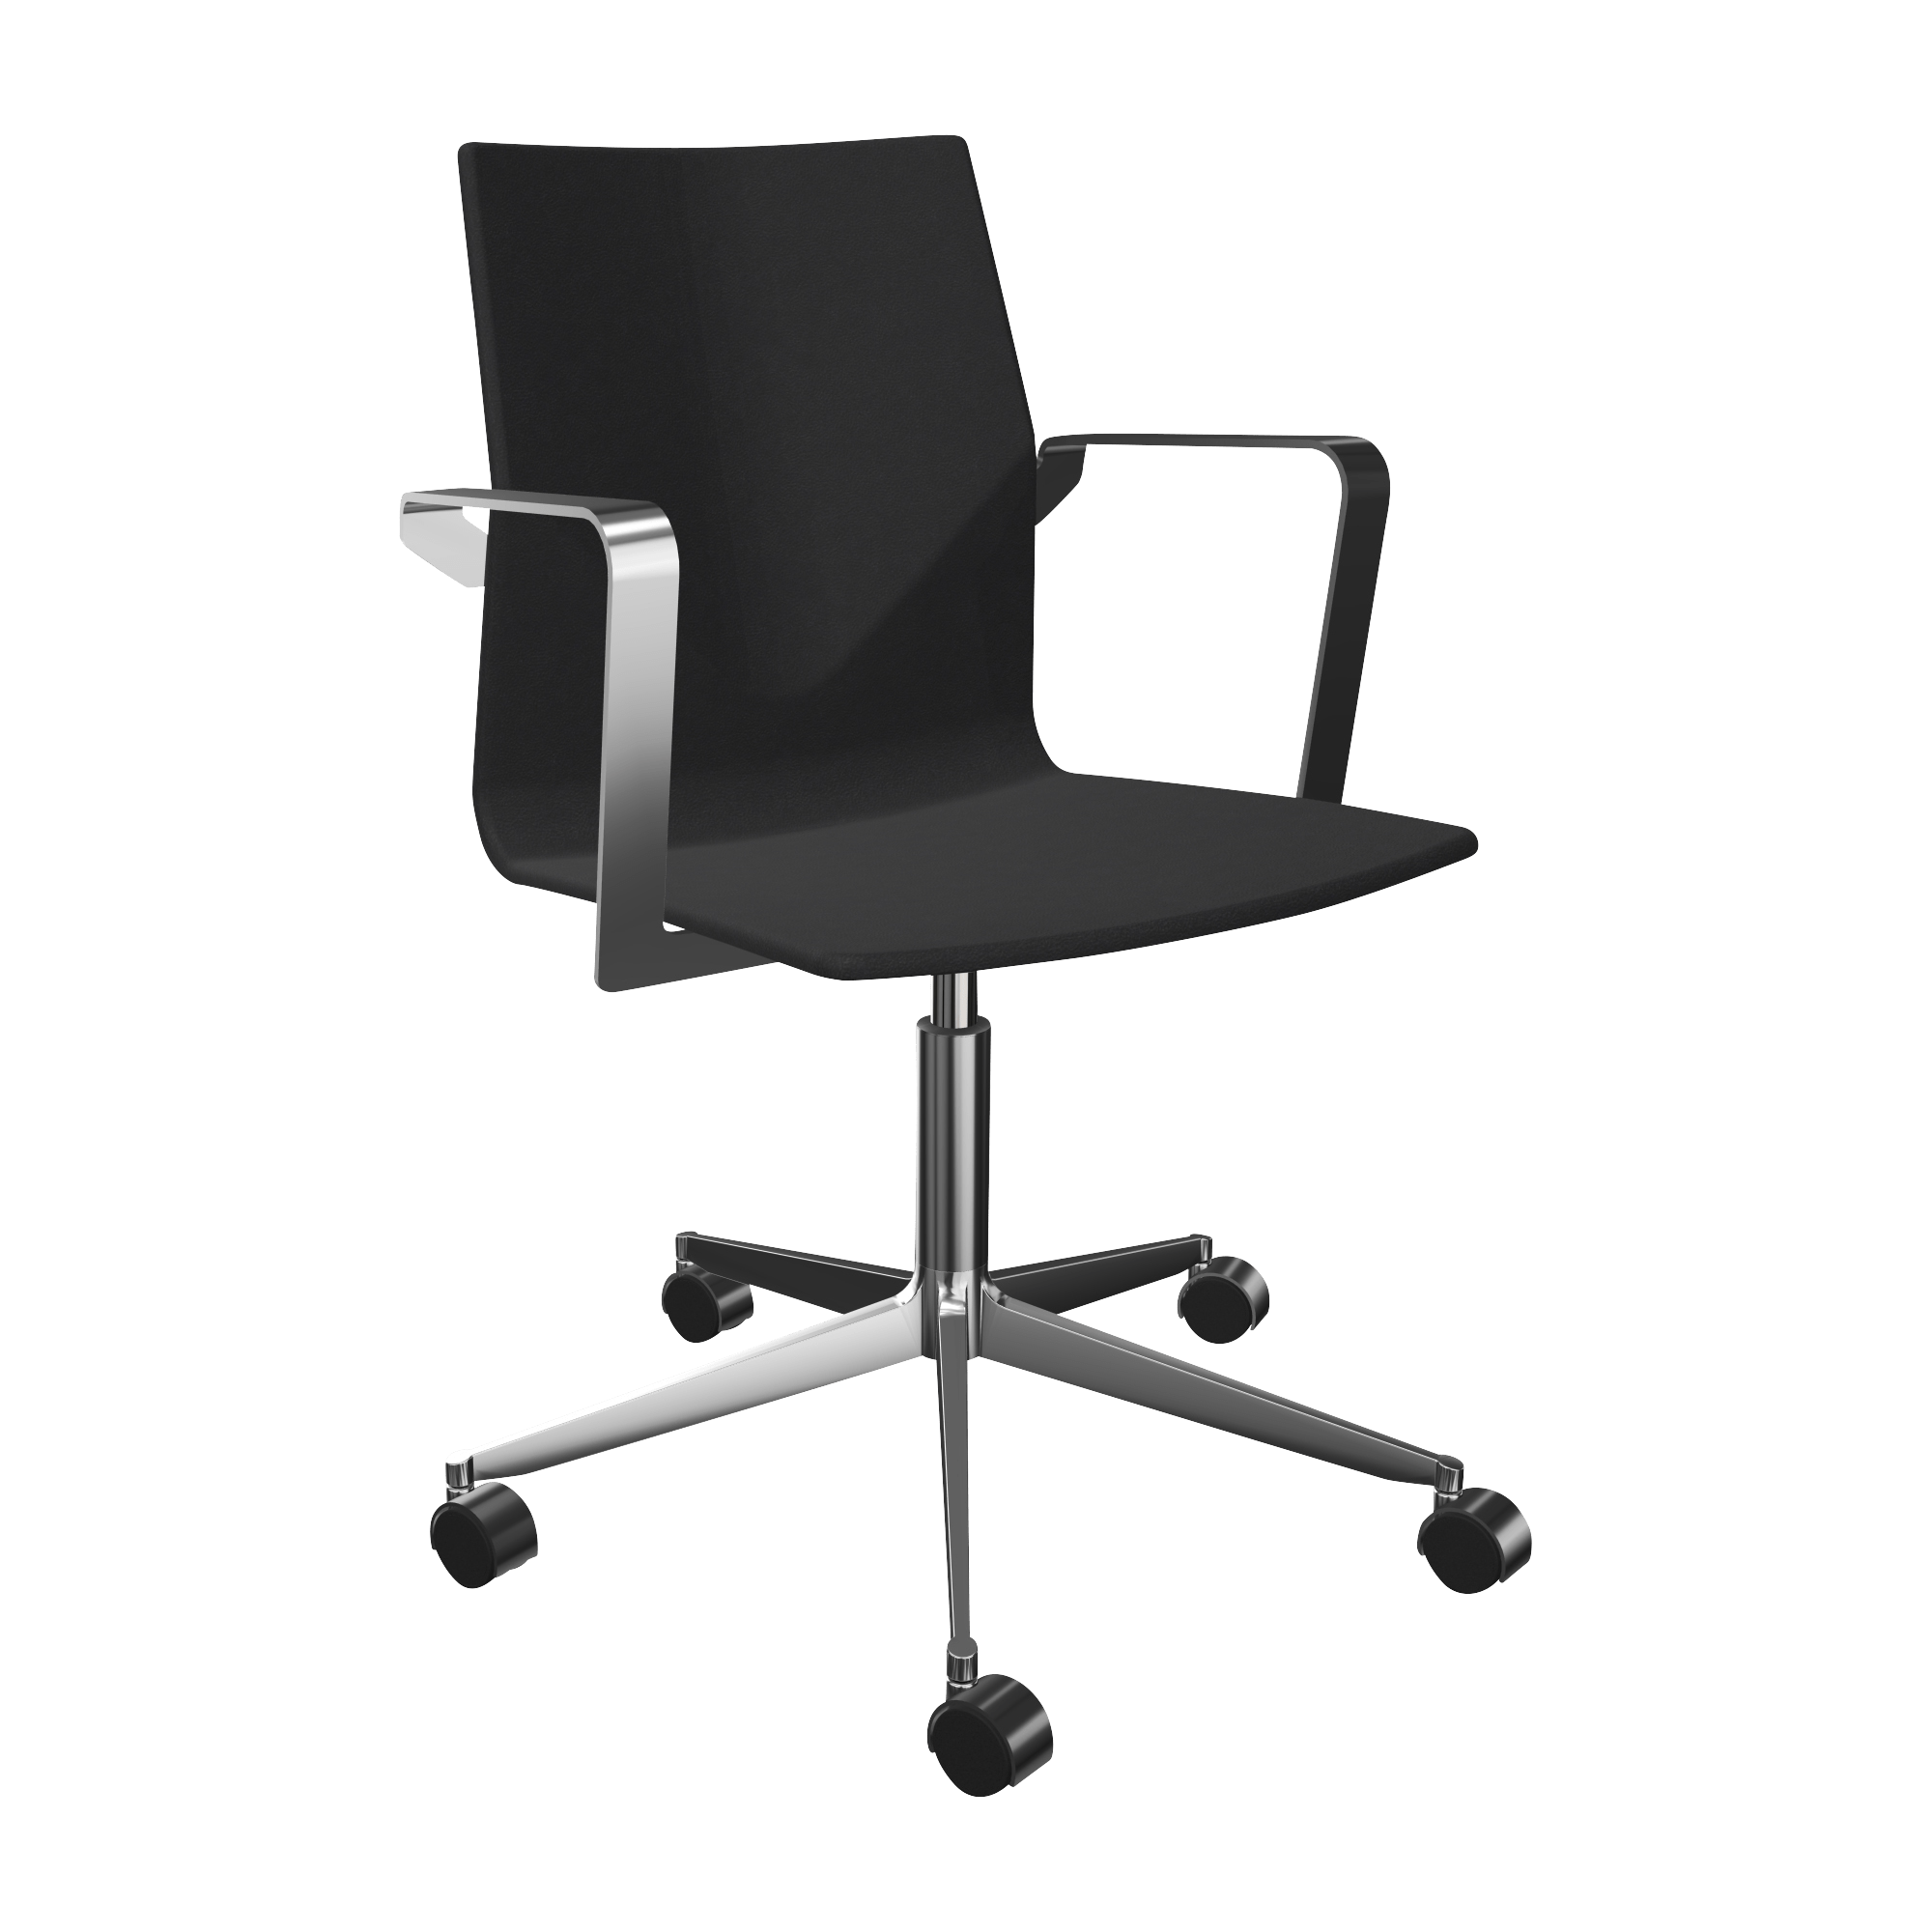 A black office chair with arm rests with a pedestal leg and wheels